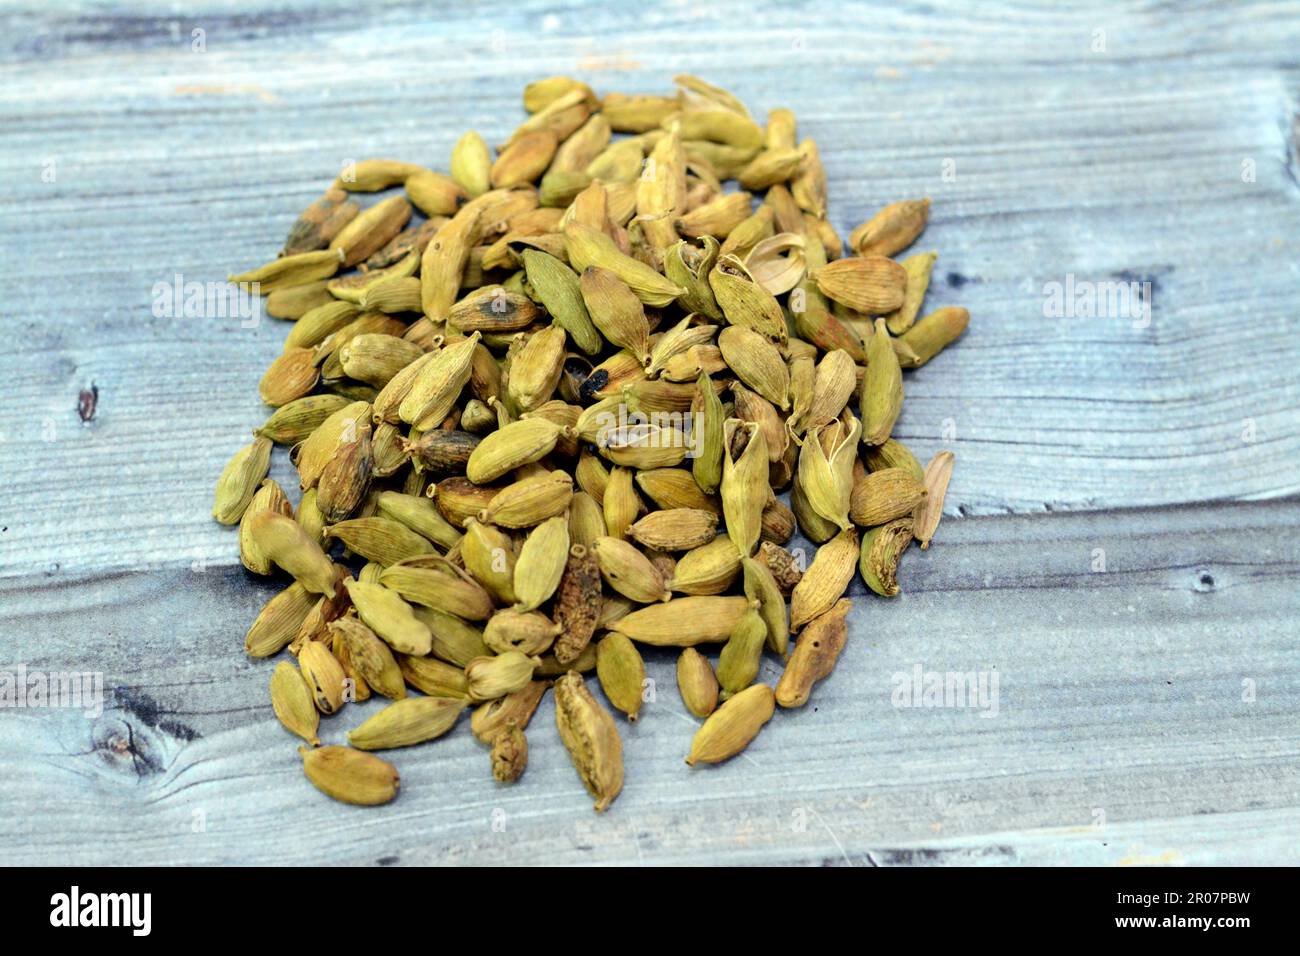 Cardamom, cardamon or cardamum, a spice made from the seeds of several plants in the genera Elettaria and Amomum in the family Zingiberaceae, used in Stock Photo